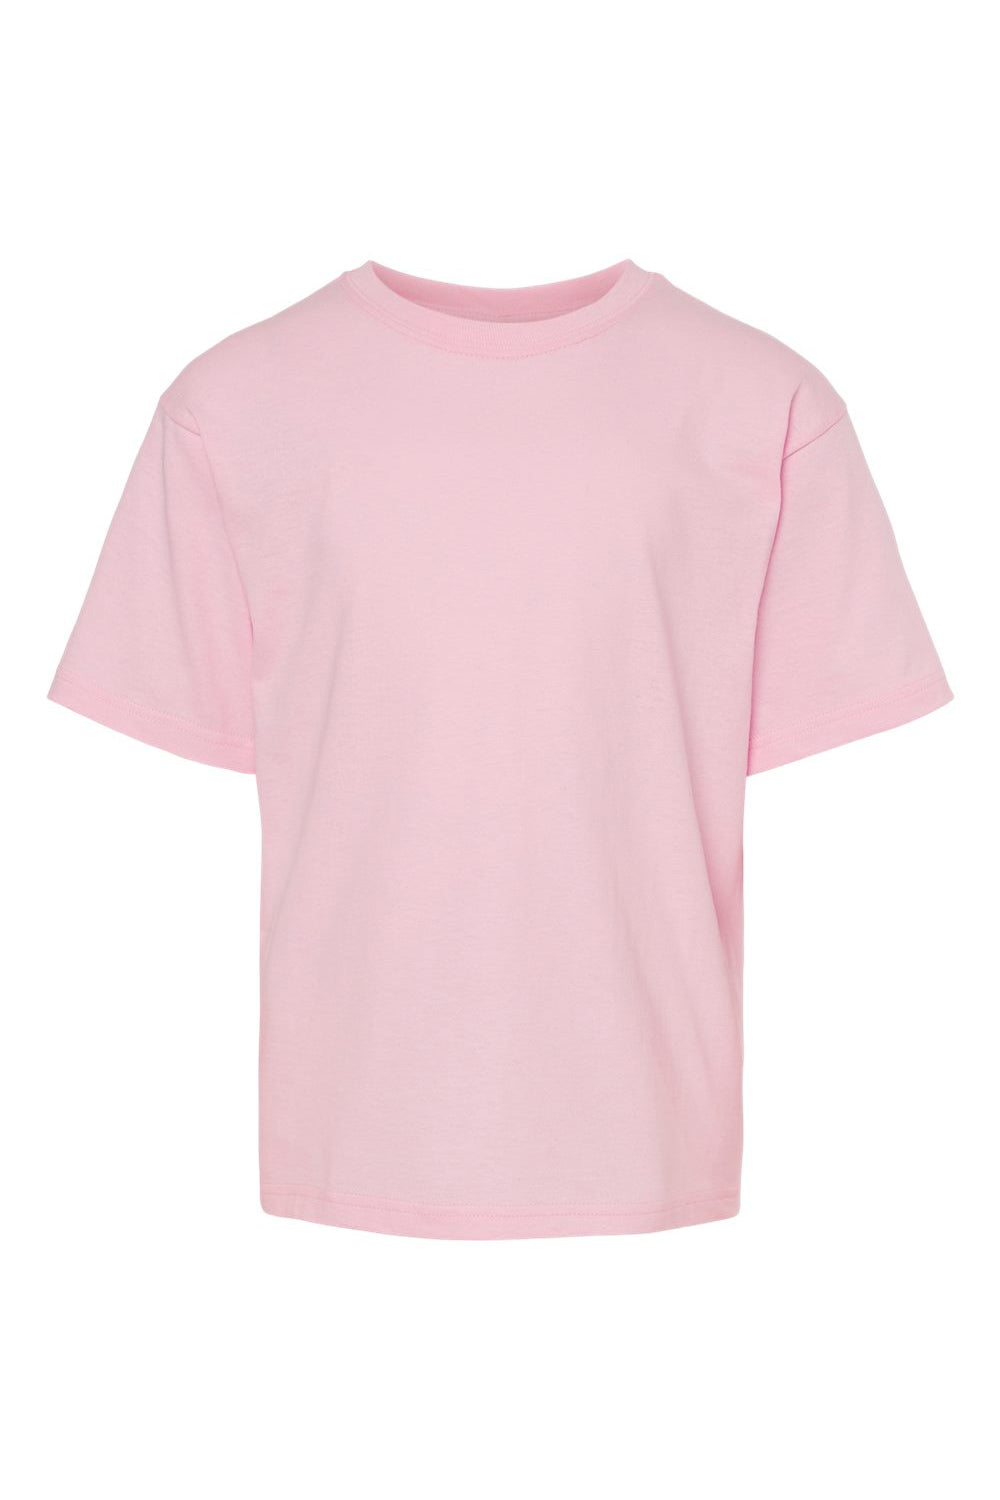 M&O 4850 Youth Gold Soft Touch Short Sleeve Crewneck T-Shirt Light Pink Flat Front